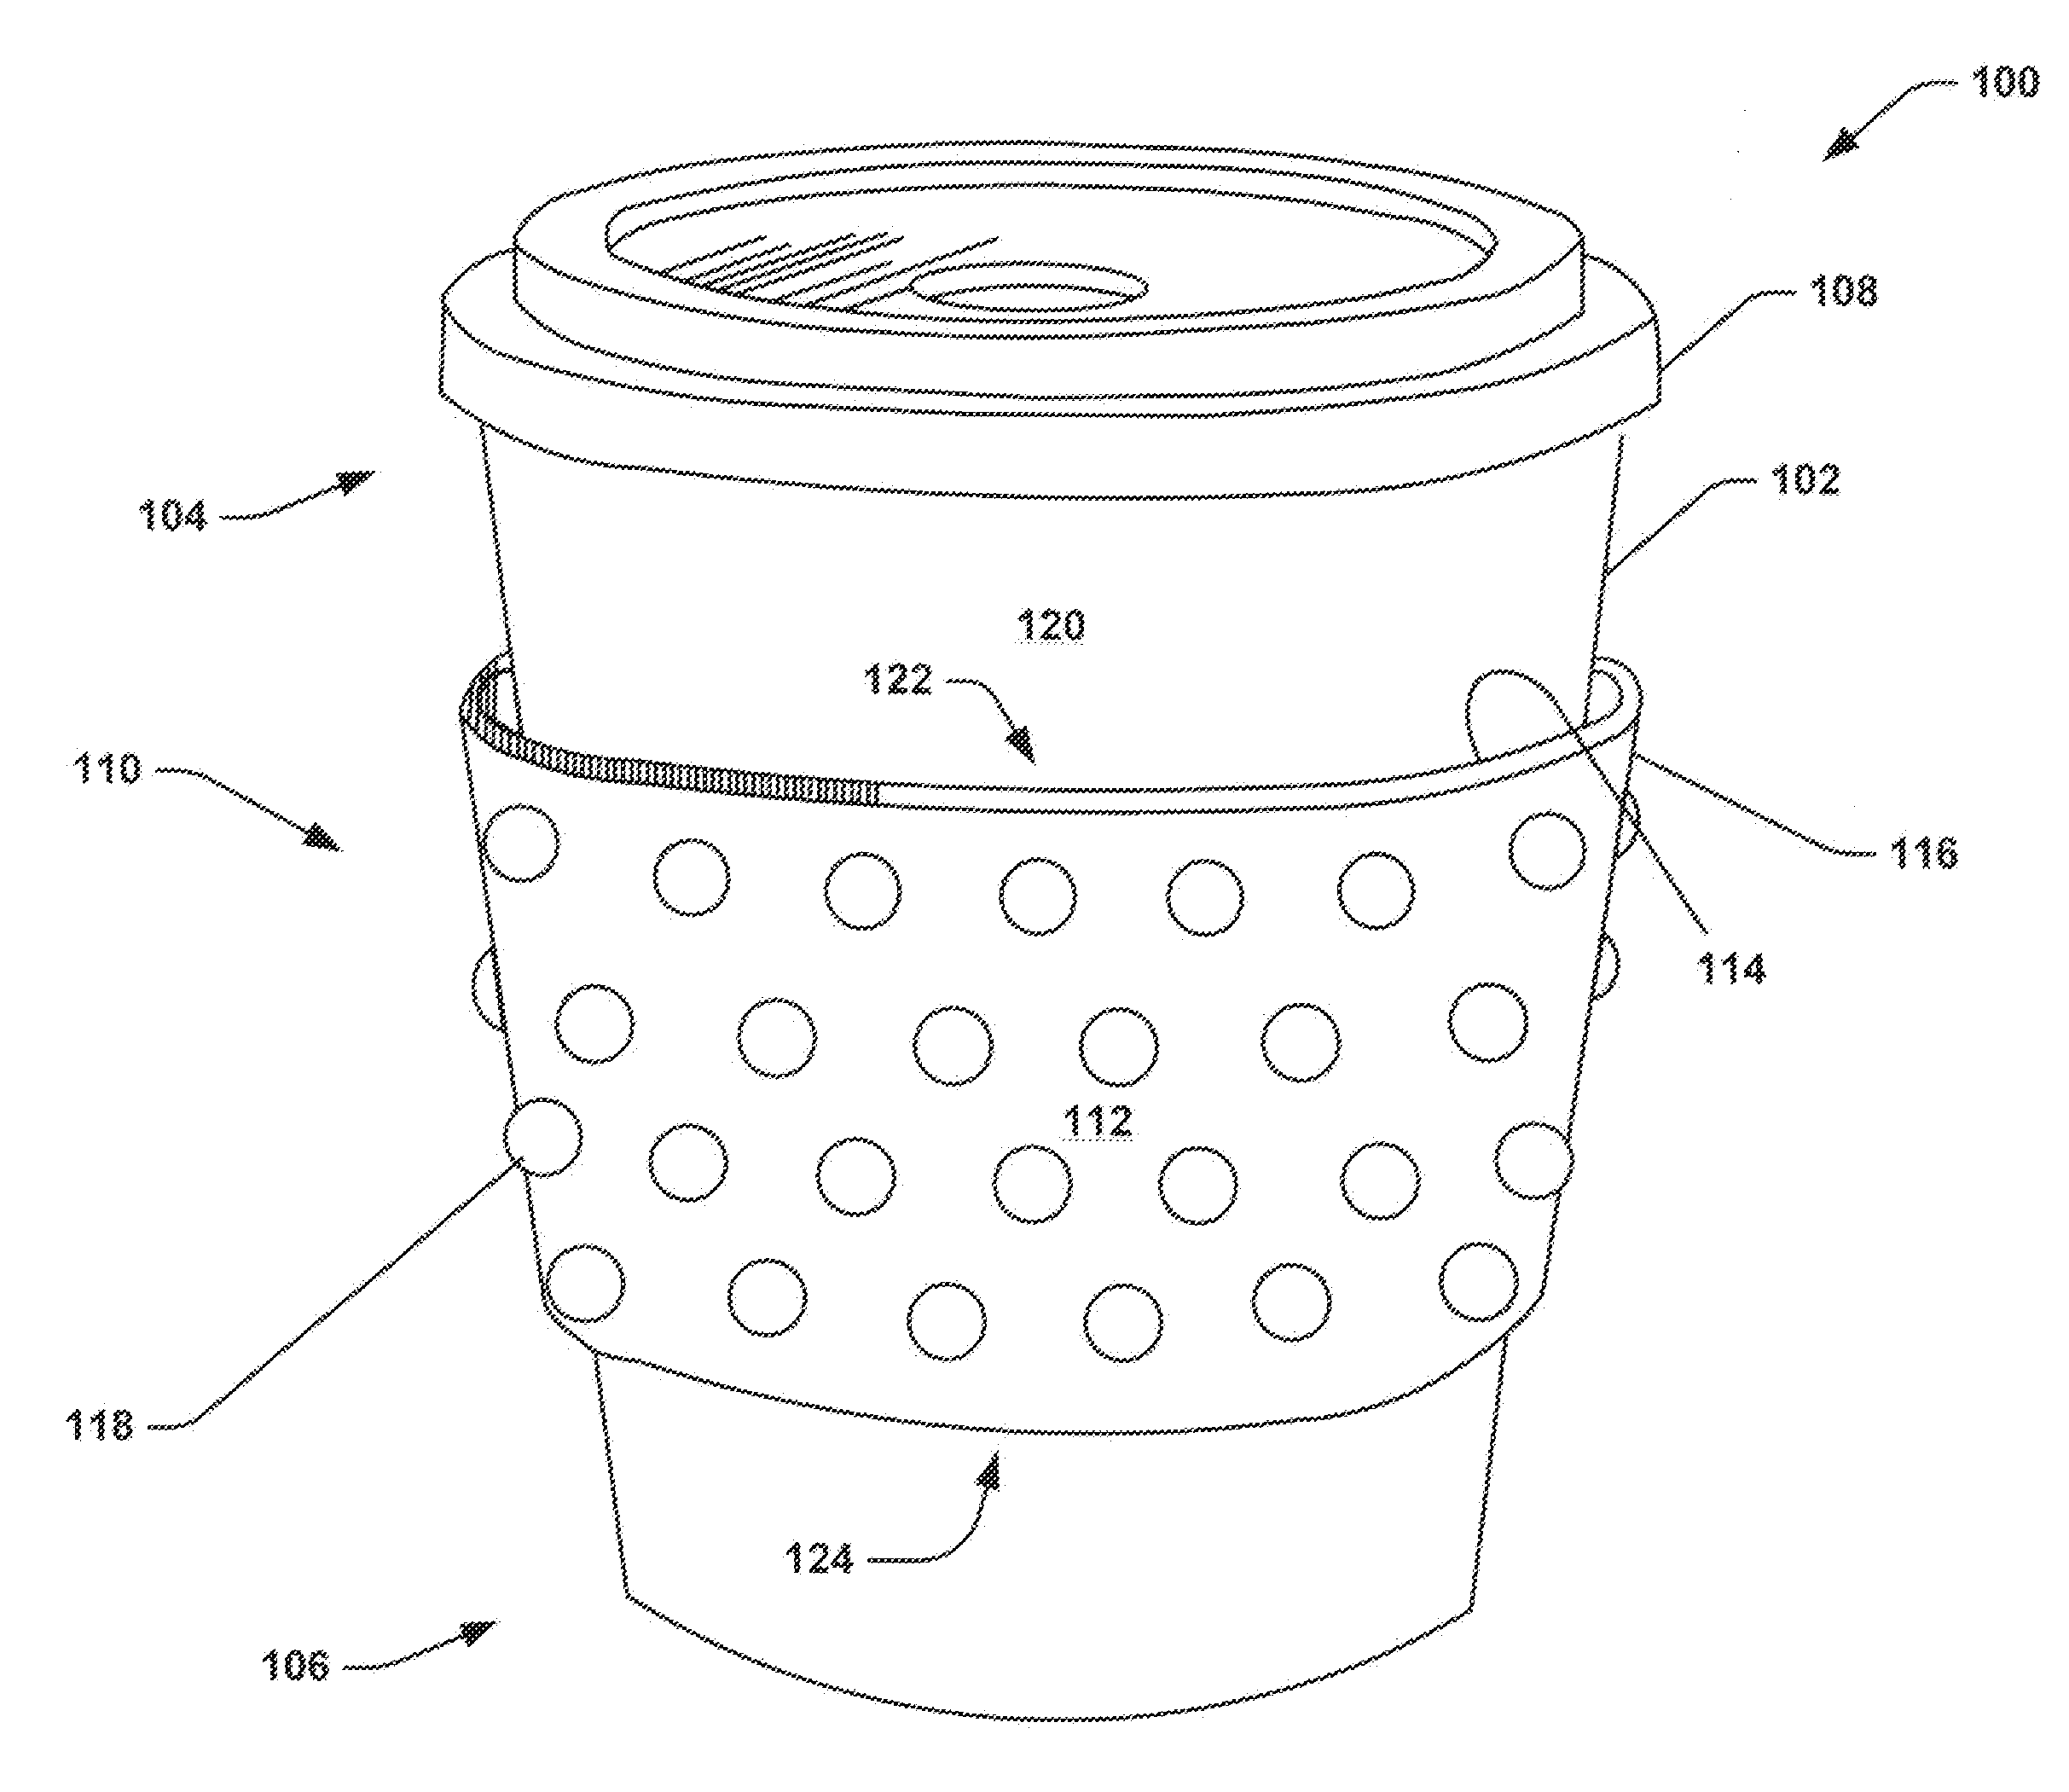 Beverage cup sleeving system and method